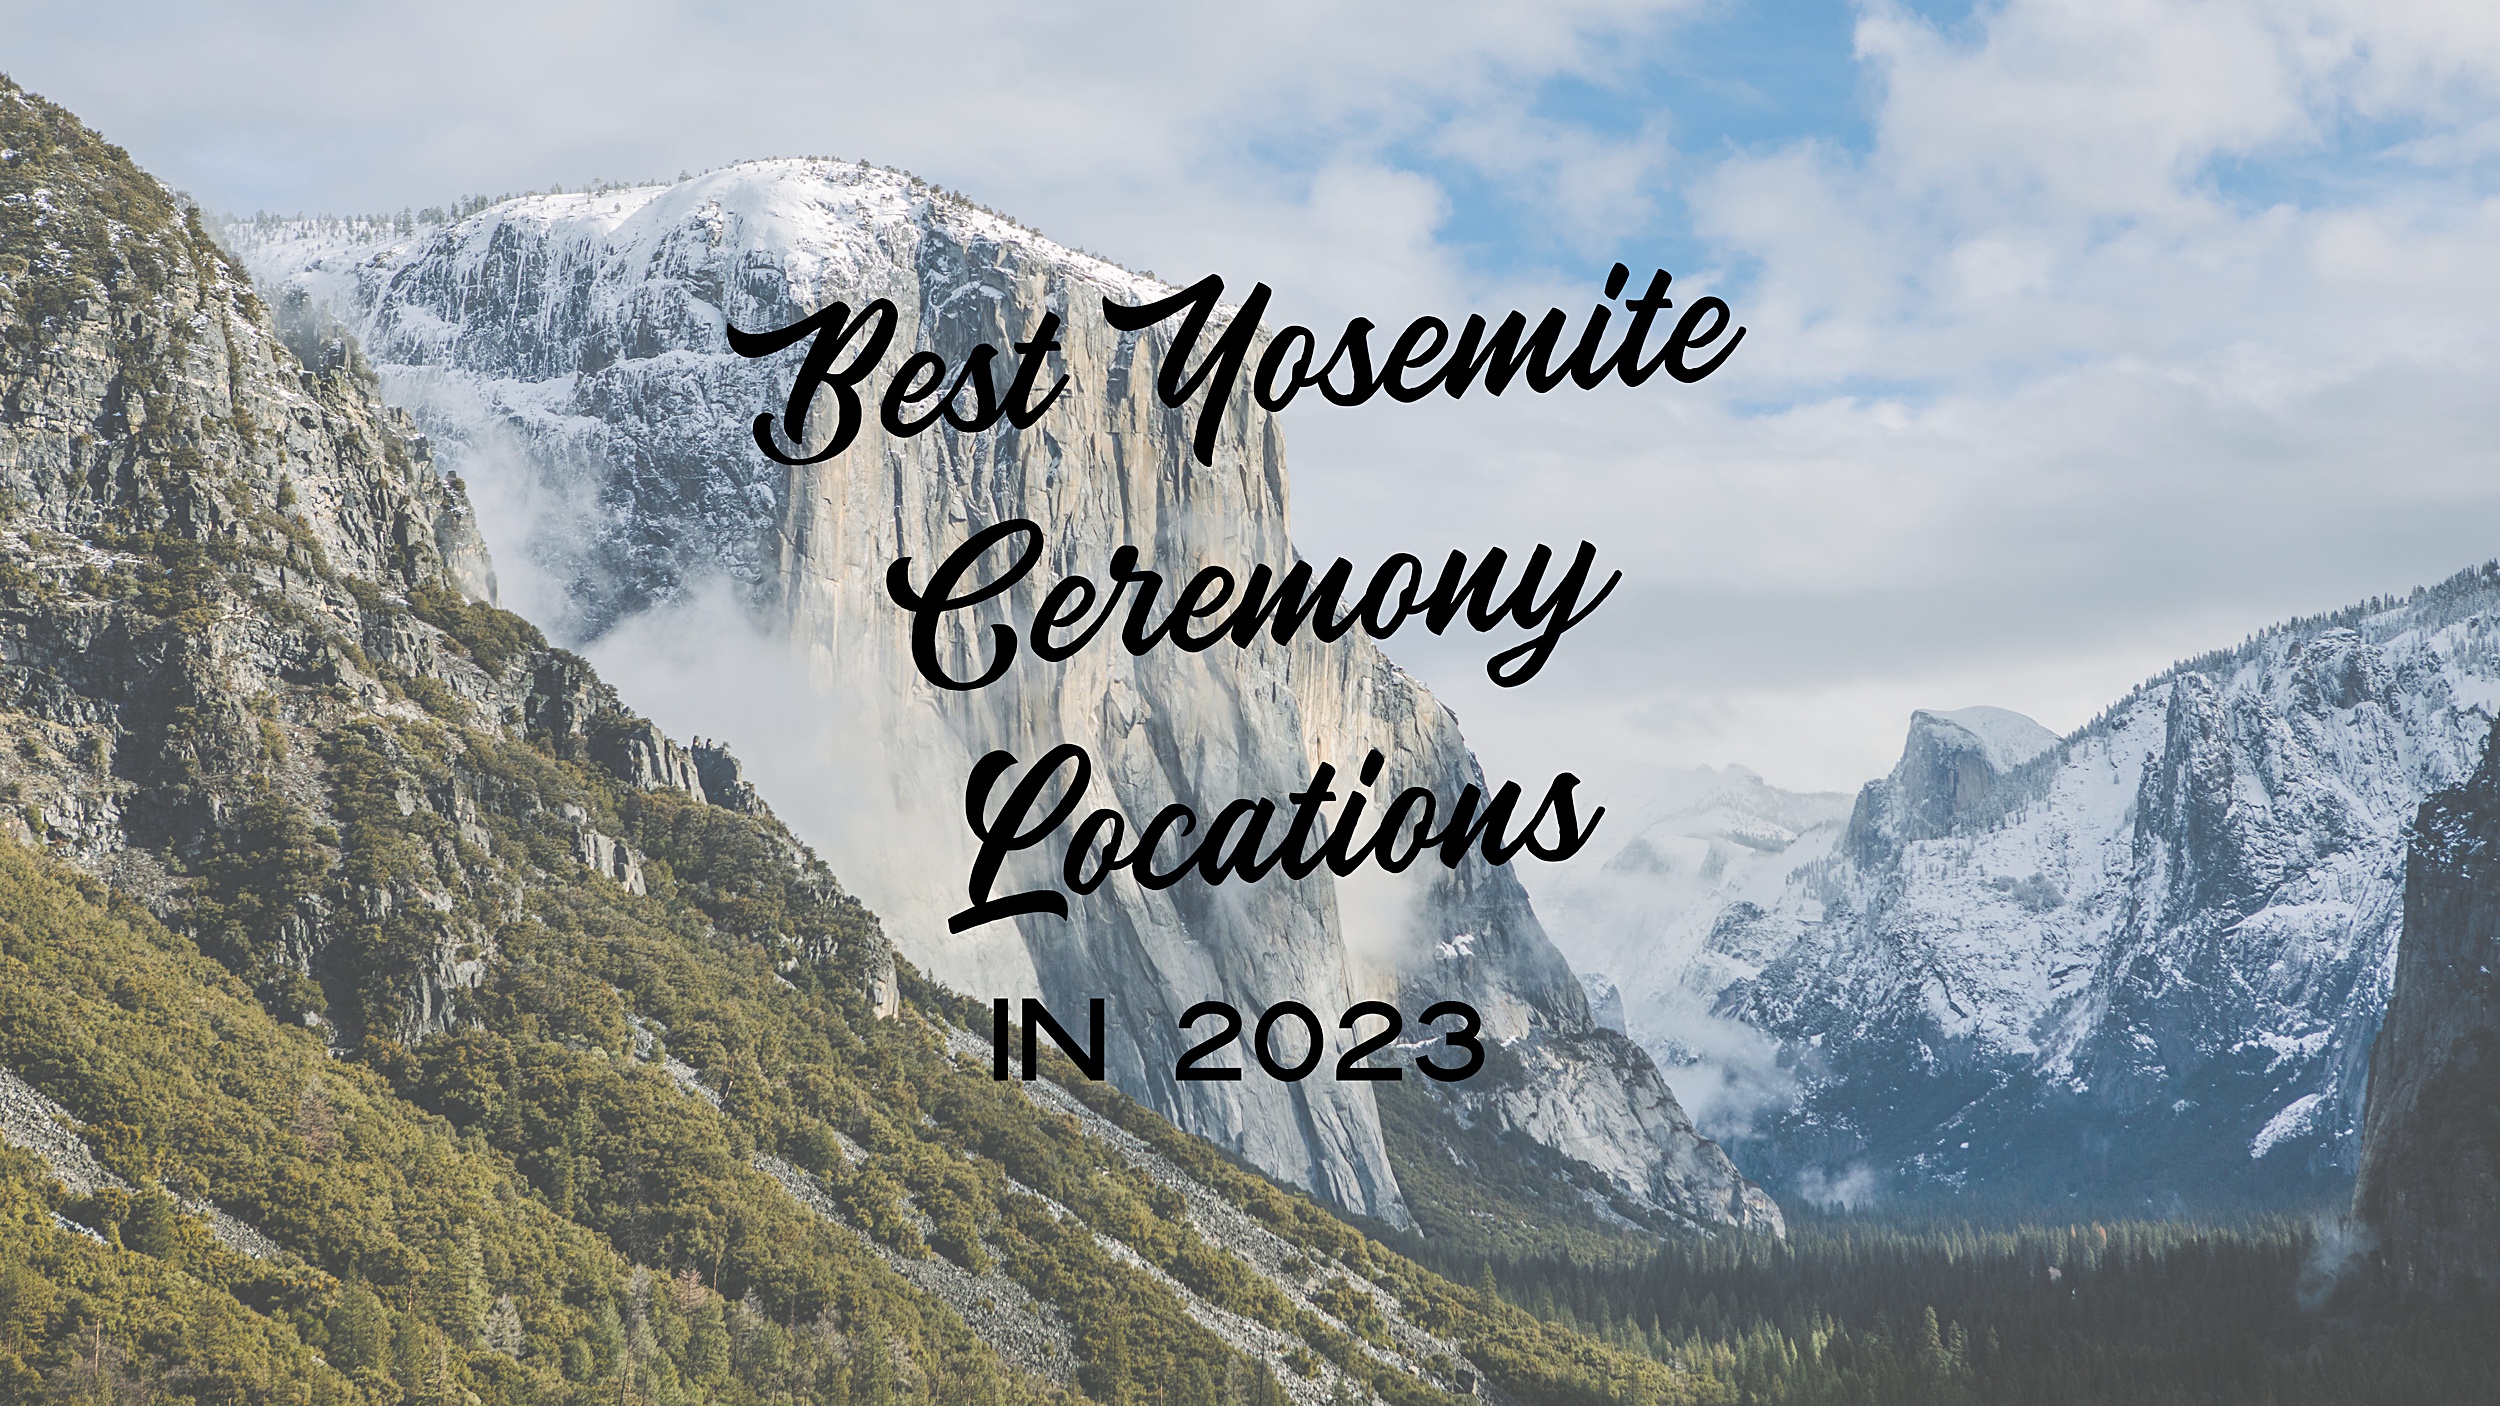 Best-Yosemite-Ceremony-Locations-1 The Best Outdoor Yosemite Wedding Locations for your 2023 Elopement